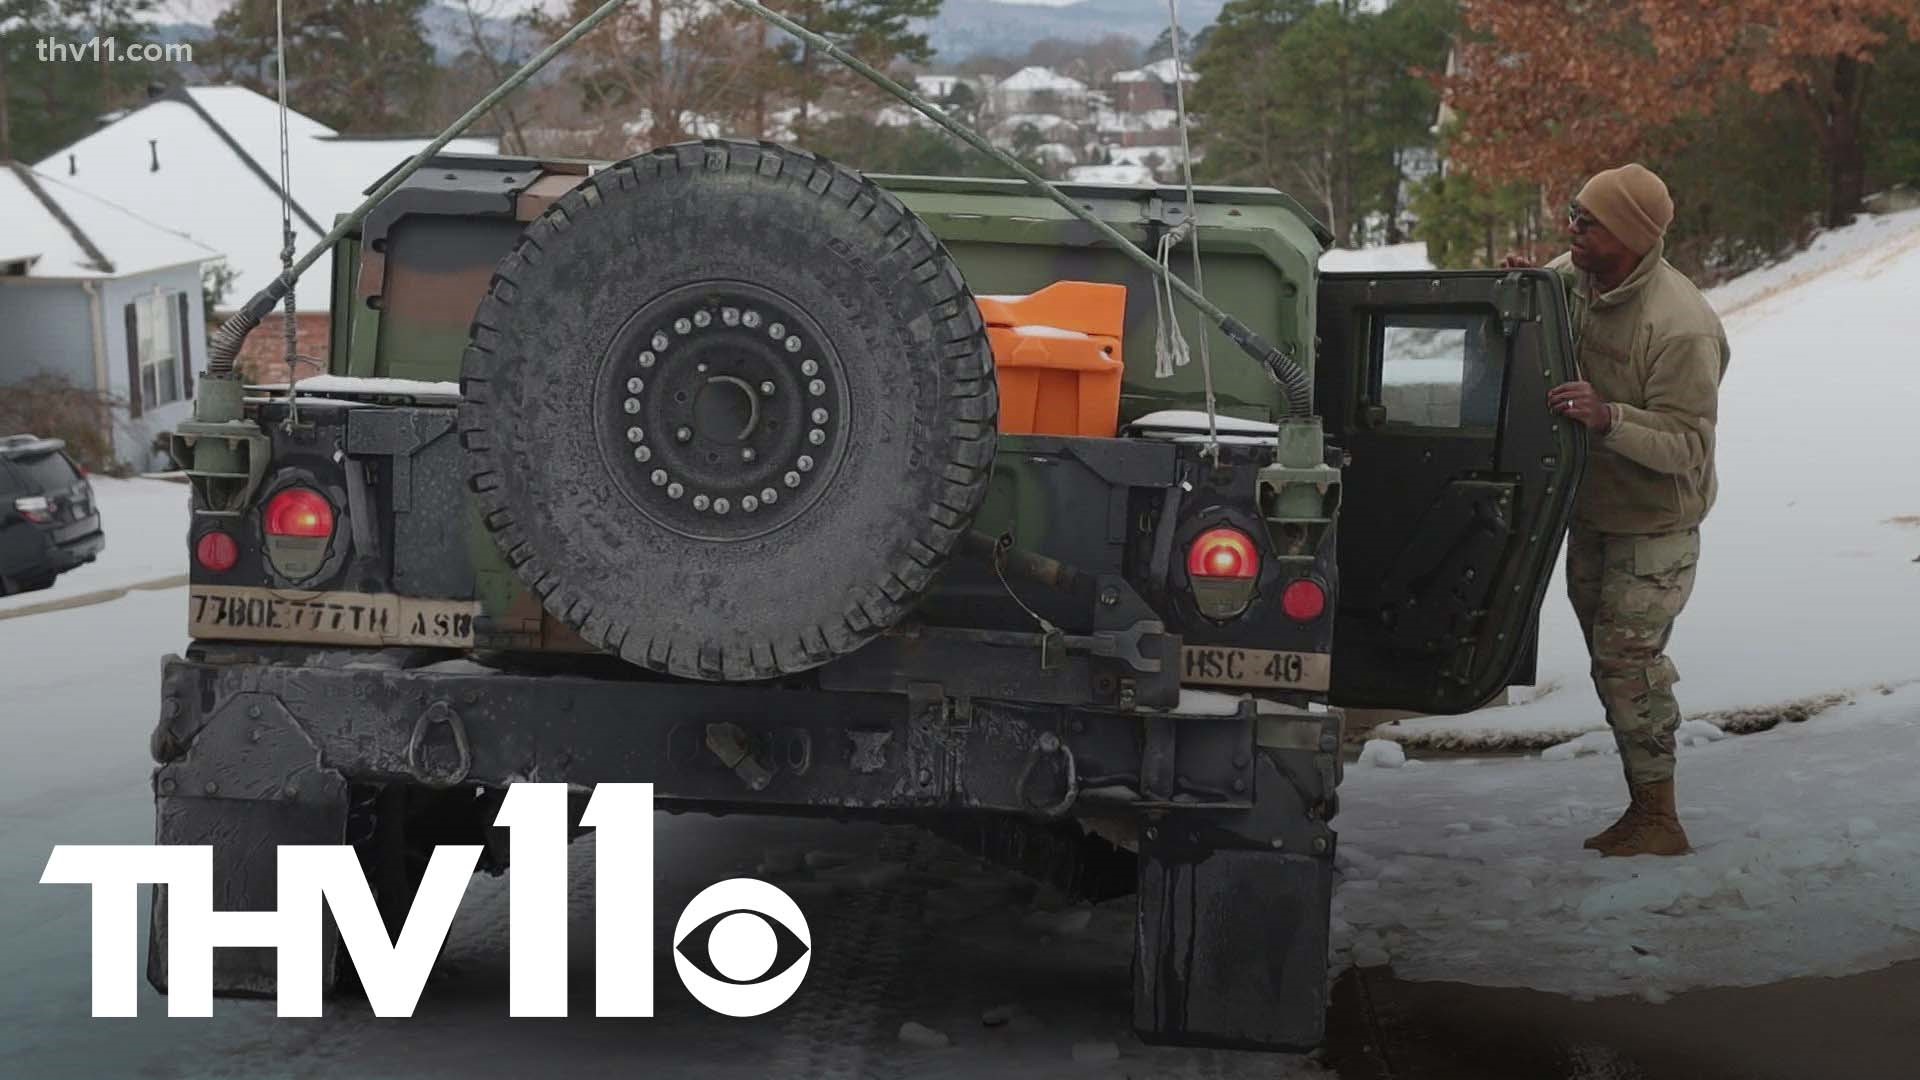 Winter weather caused roads to become icy, with the sun working to clear some of it up. Now, the Arkansas National Guard is doing what it can to help as well.